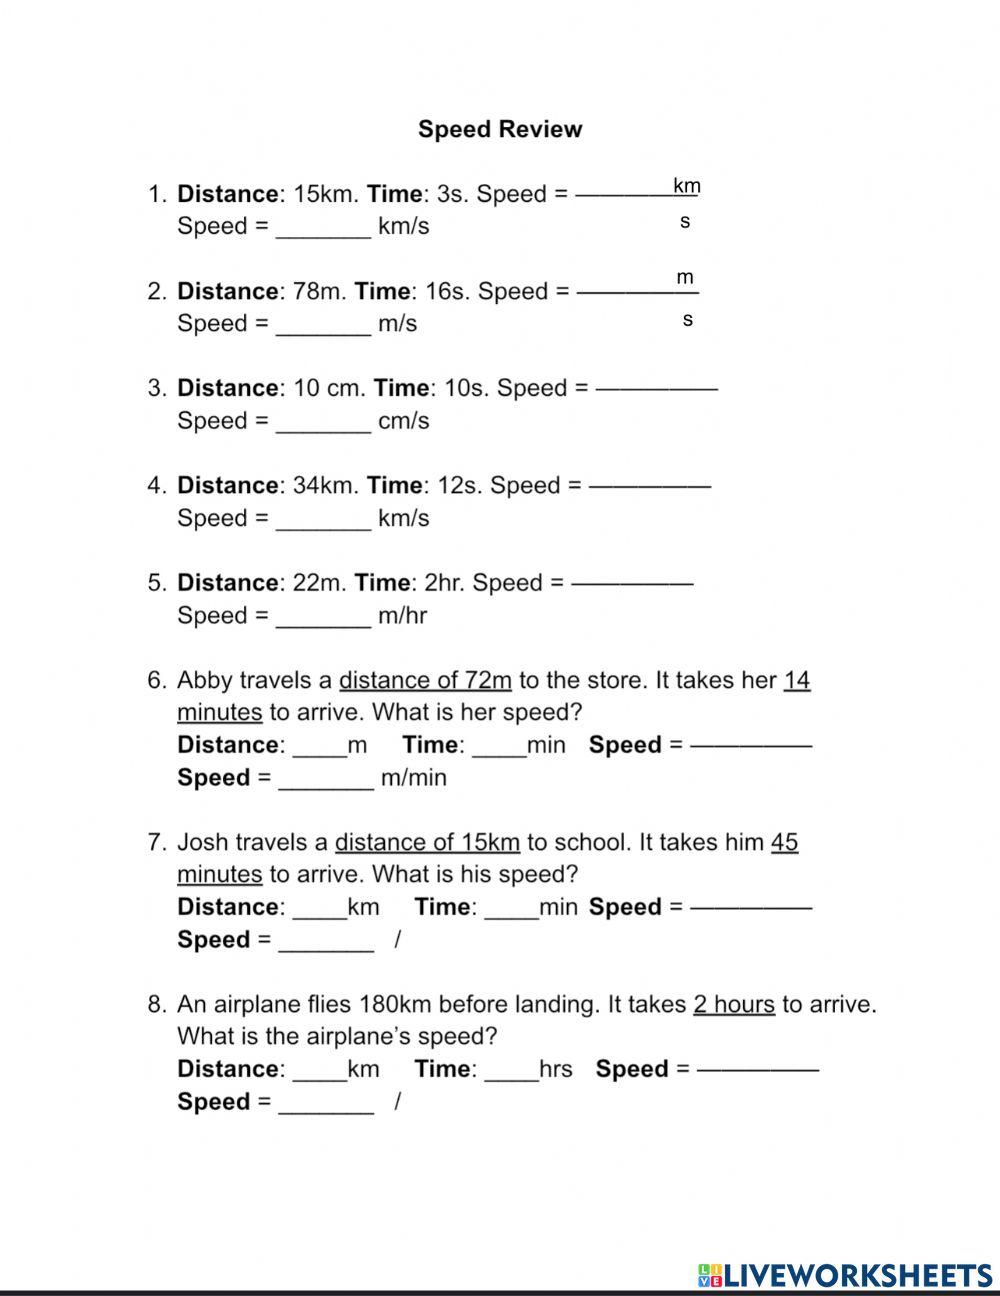 Speed Formula Review